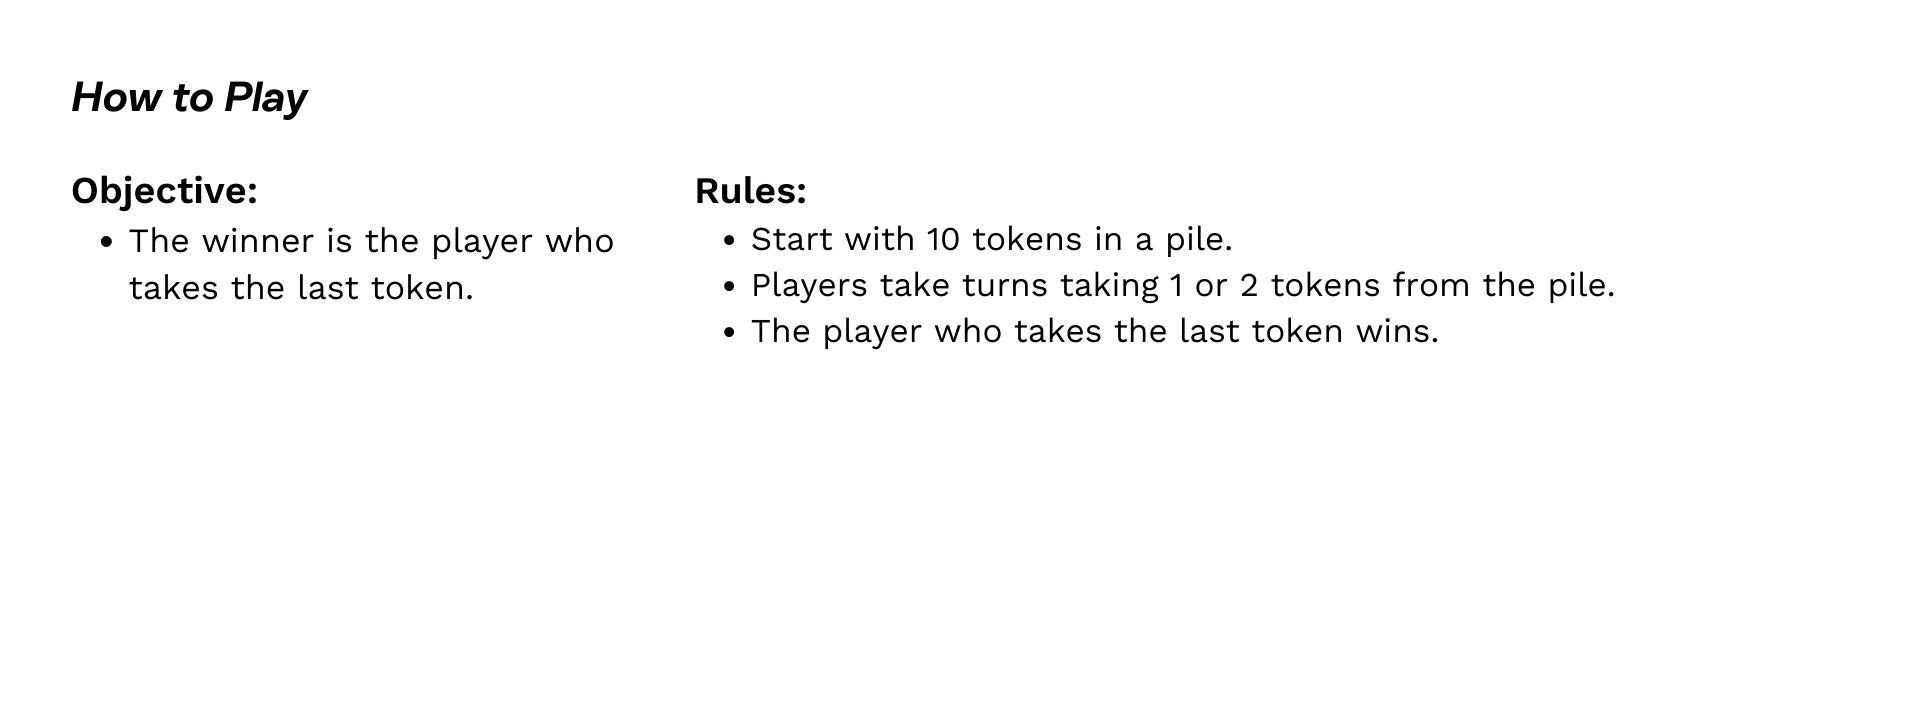 Be the player to take the last token!